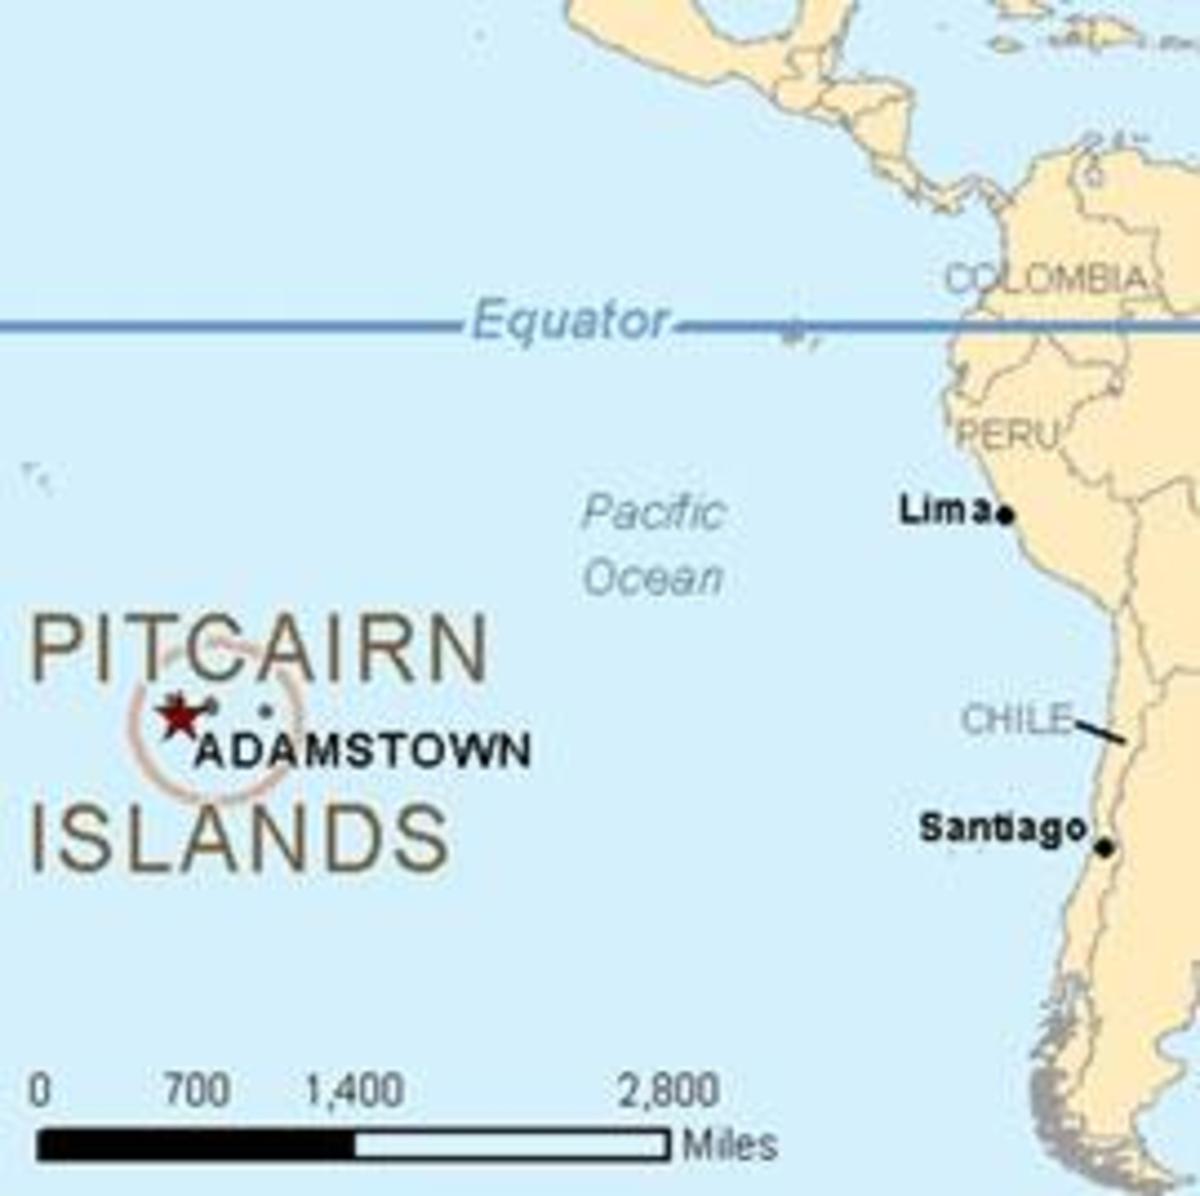 Pitcairn Islands - The islands are Pitcairn, Henderson, Ducie, and Oeno